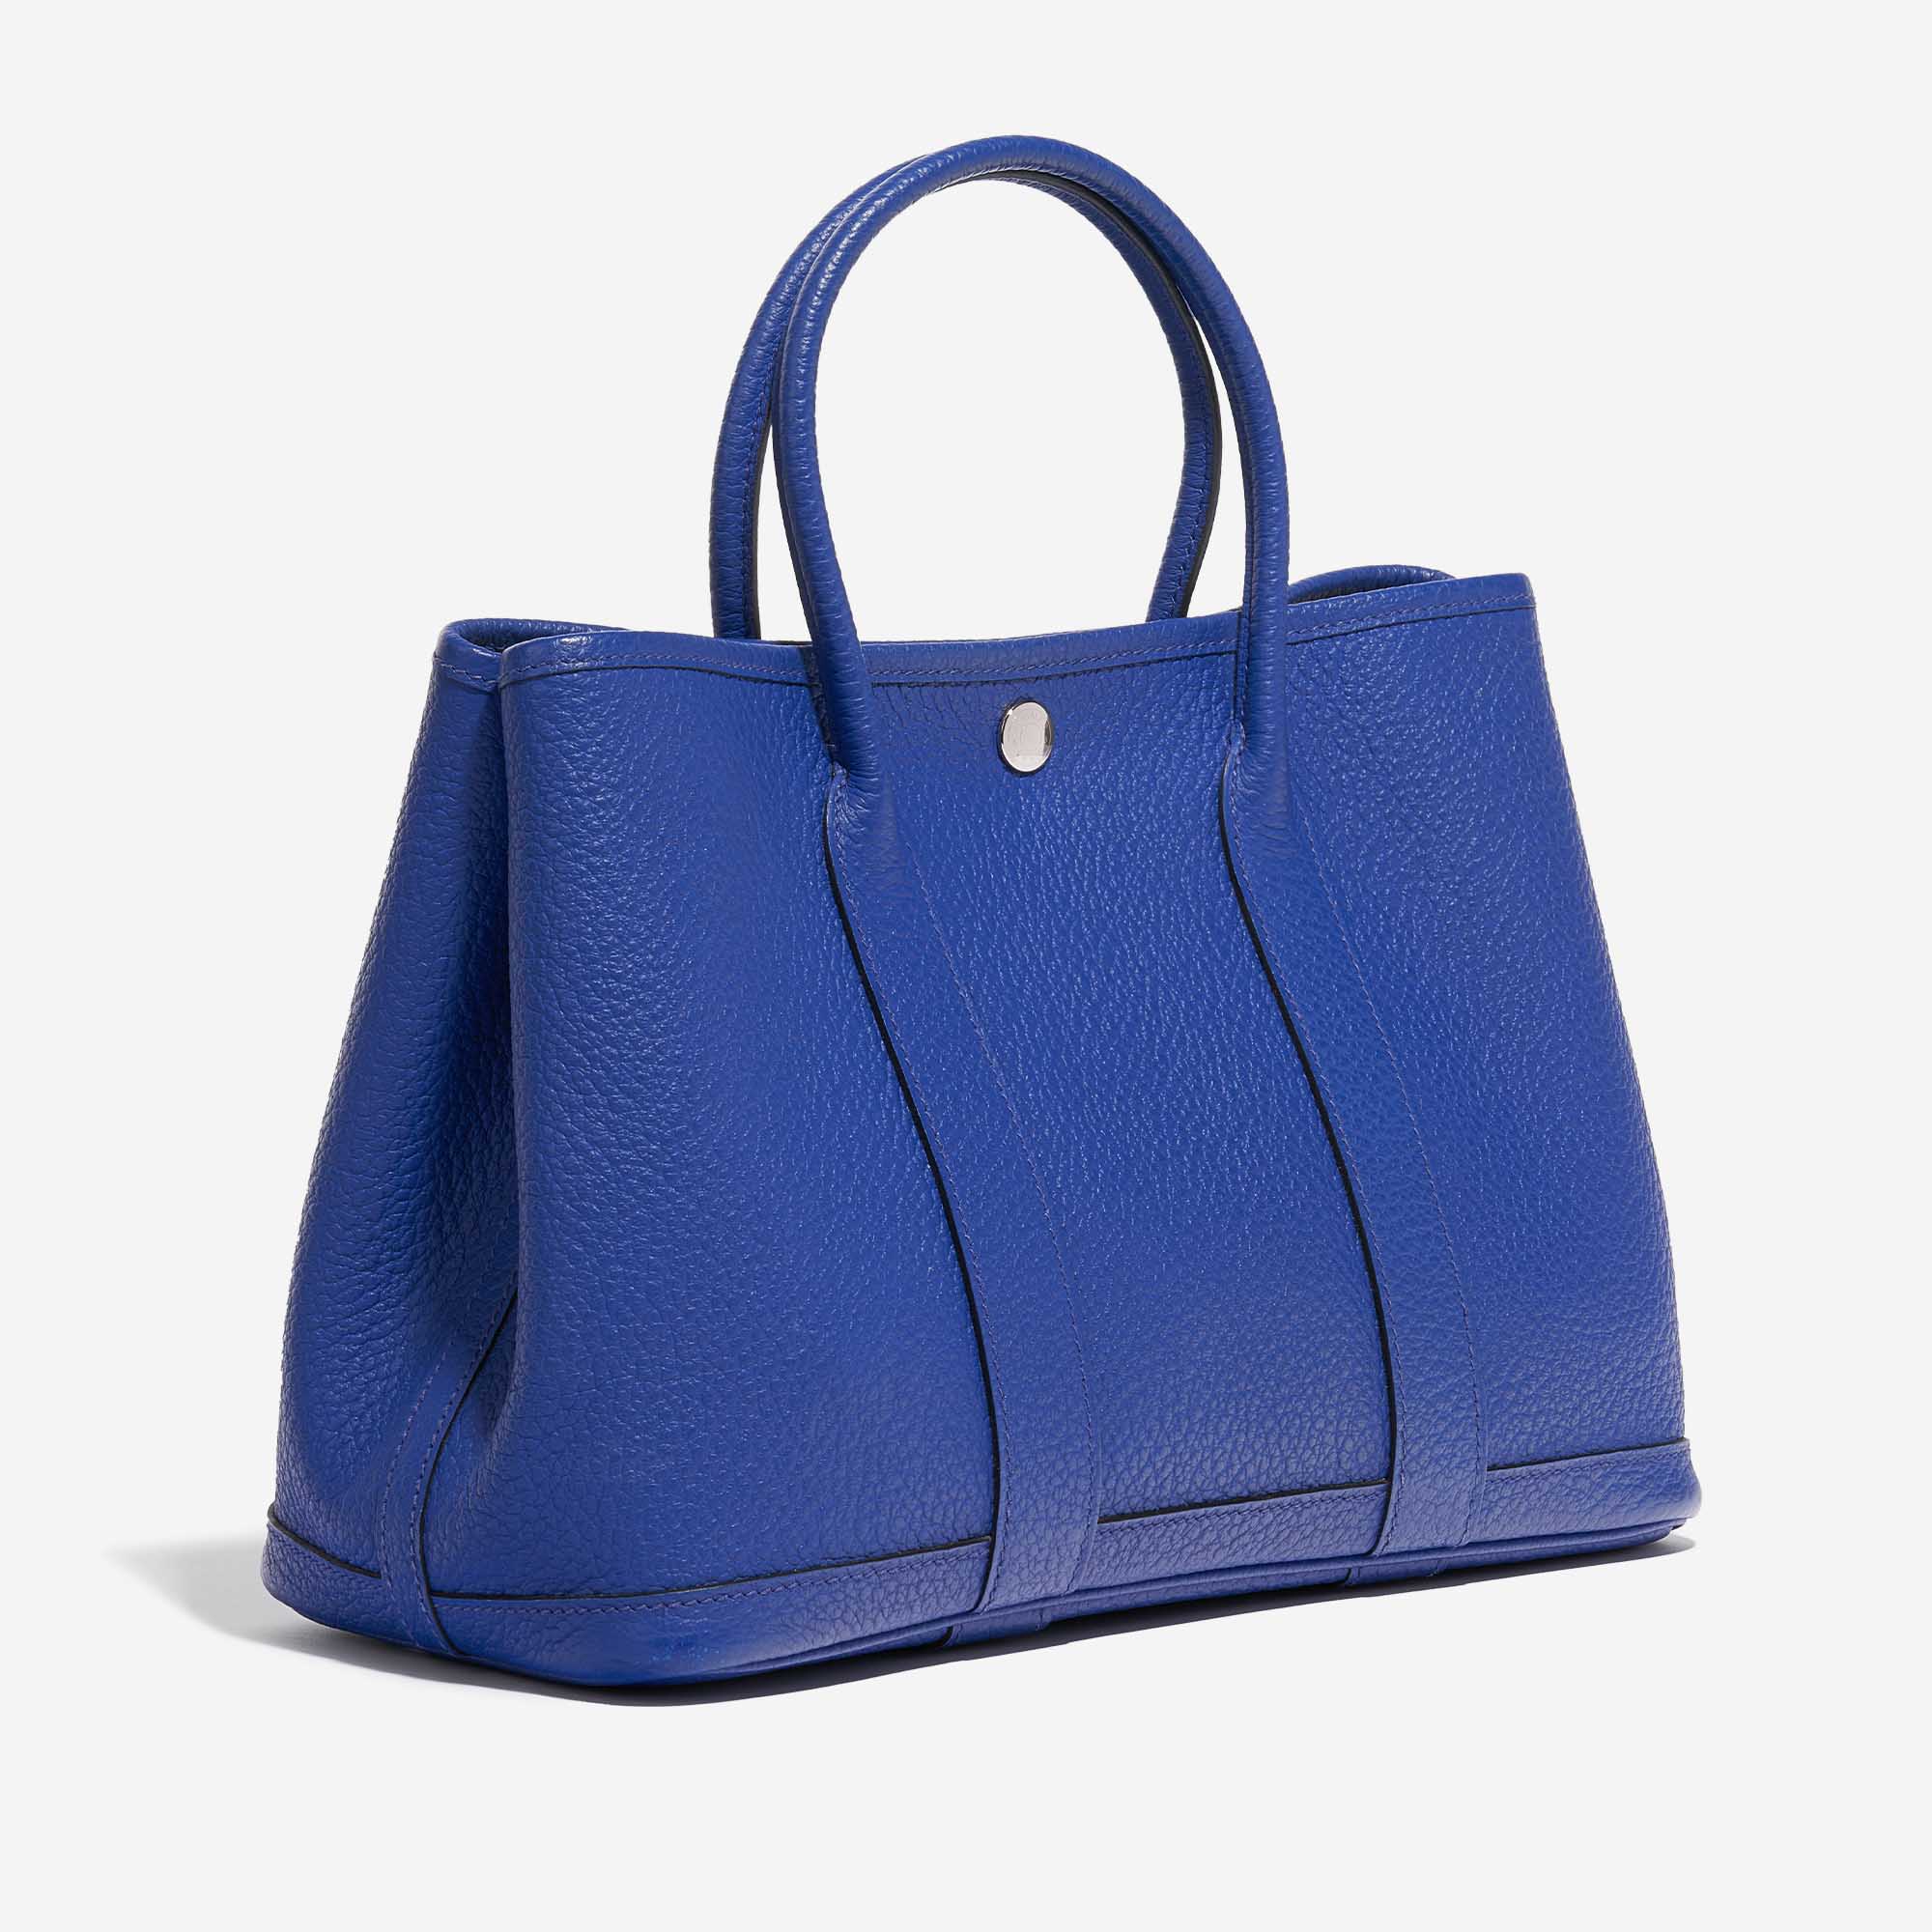 Replica Hermes Garden Party 30 Bag In Blue Jean Taurillon Leather